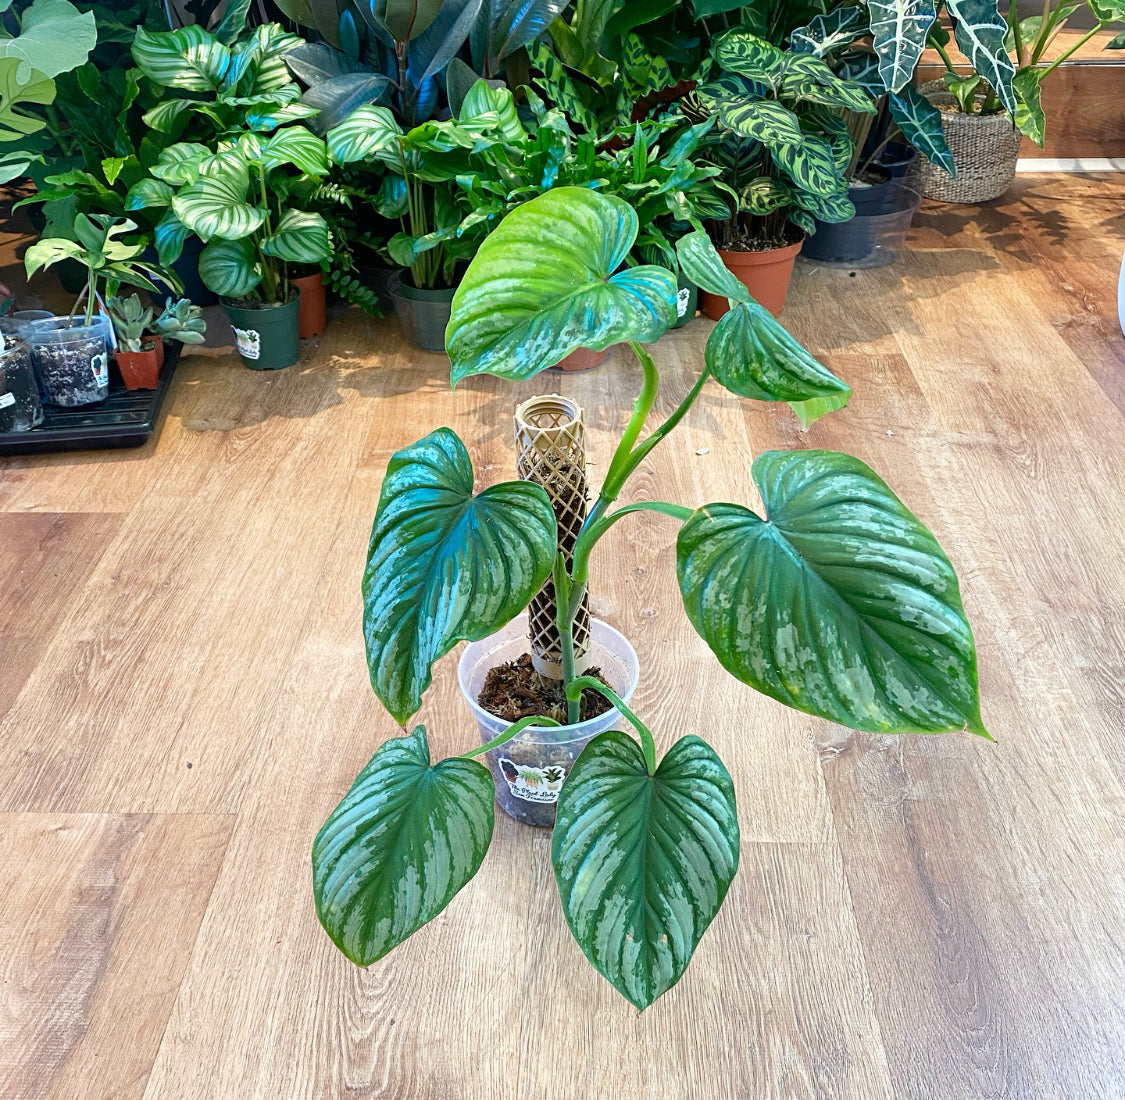 Philodendron mamei "Silver Cloud"